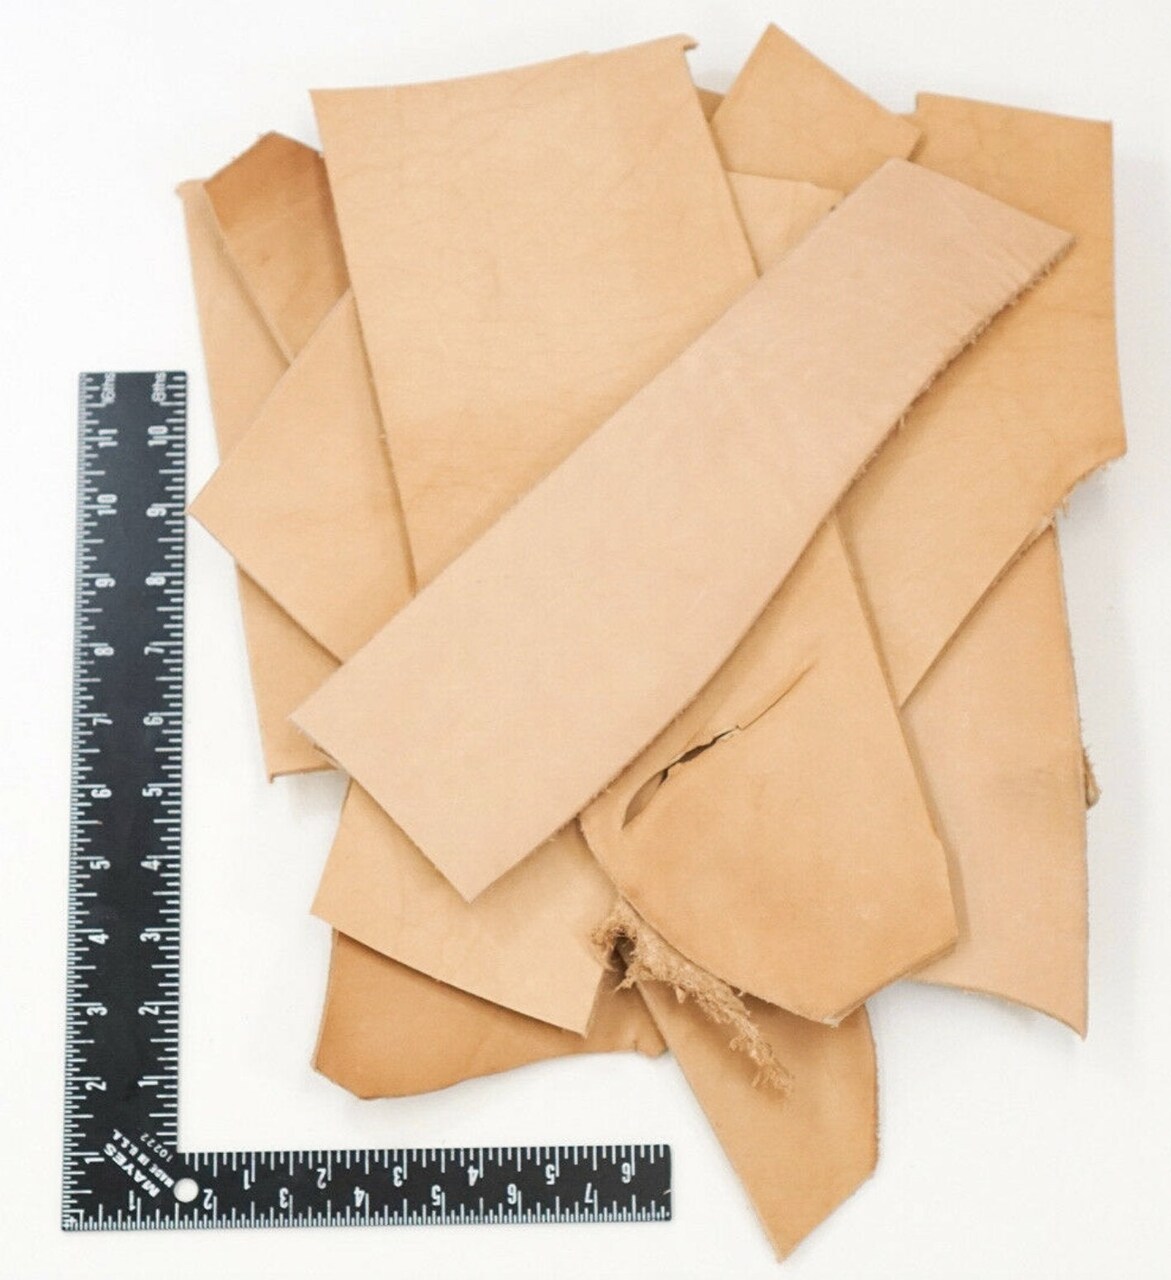 10 LB Leather Scraps  (7oz-12oz) - Vegetable Tan Tooling Cowhide Leather Scraps - HEAVY WEIGHT